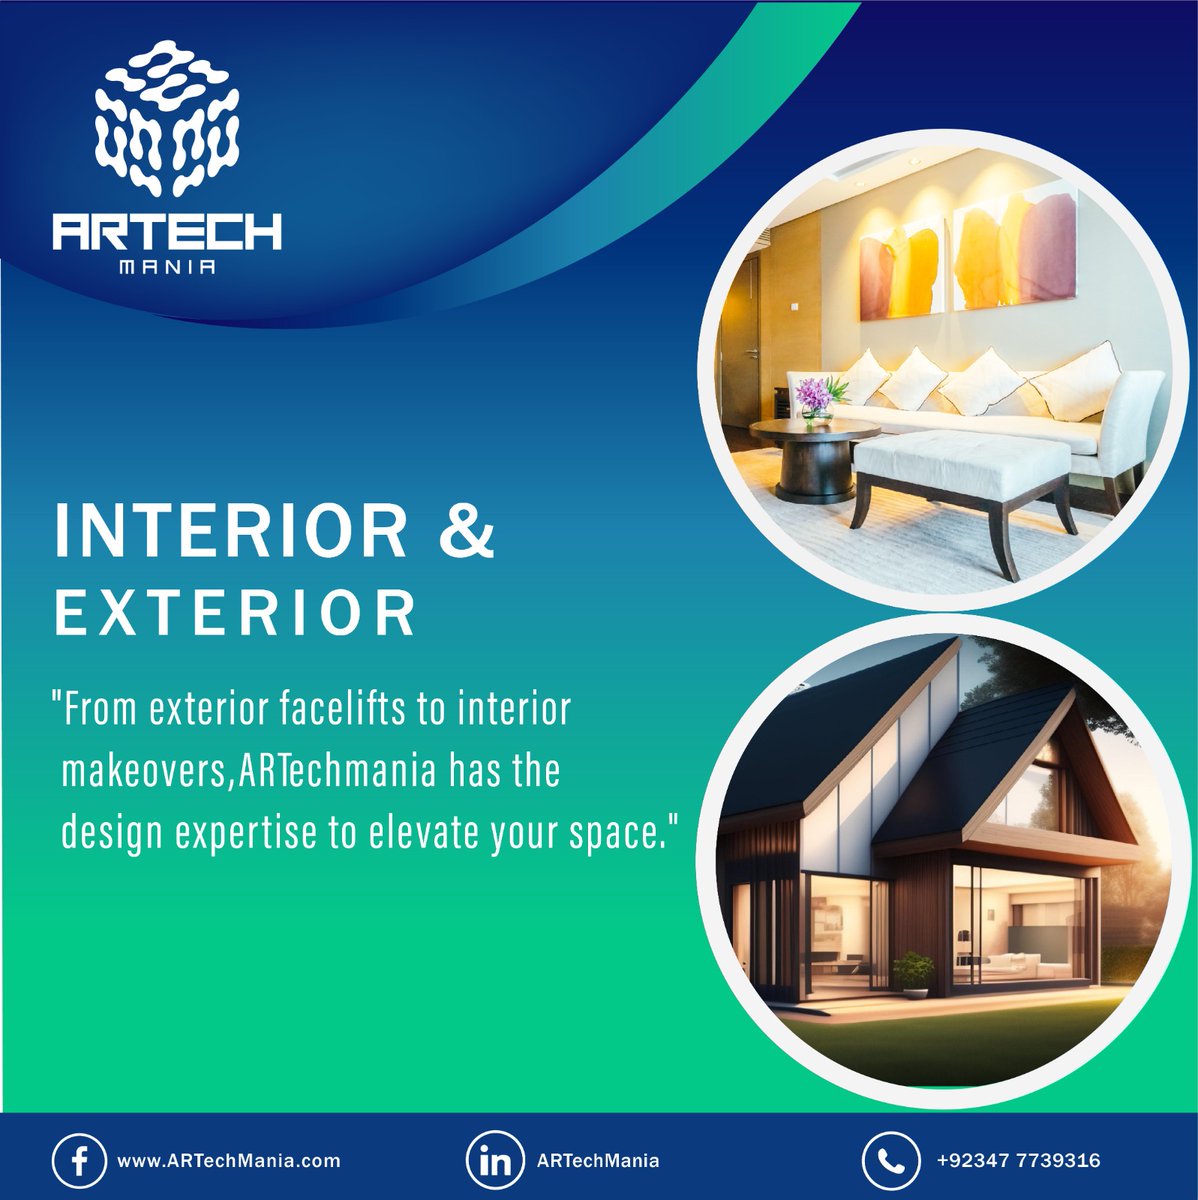 Discover the magic of transformation with AR Techmania! 🏡 Let our design expertise elevate your space, inside and out. #ARtechmania #DesignExcellence #TransformYourSpace #InteriorMagic #ExteriorMakeover #DreamSpaces #InnovativeDesign